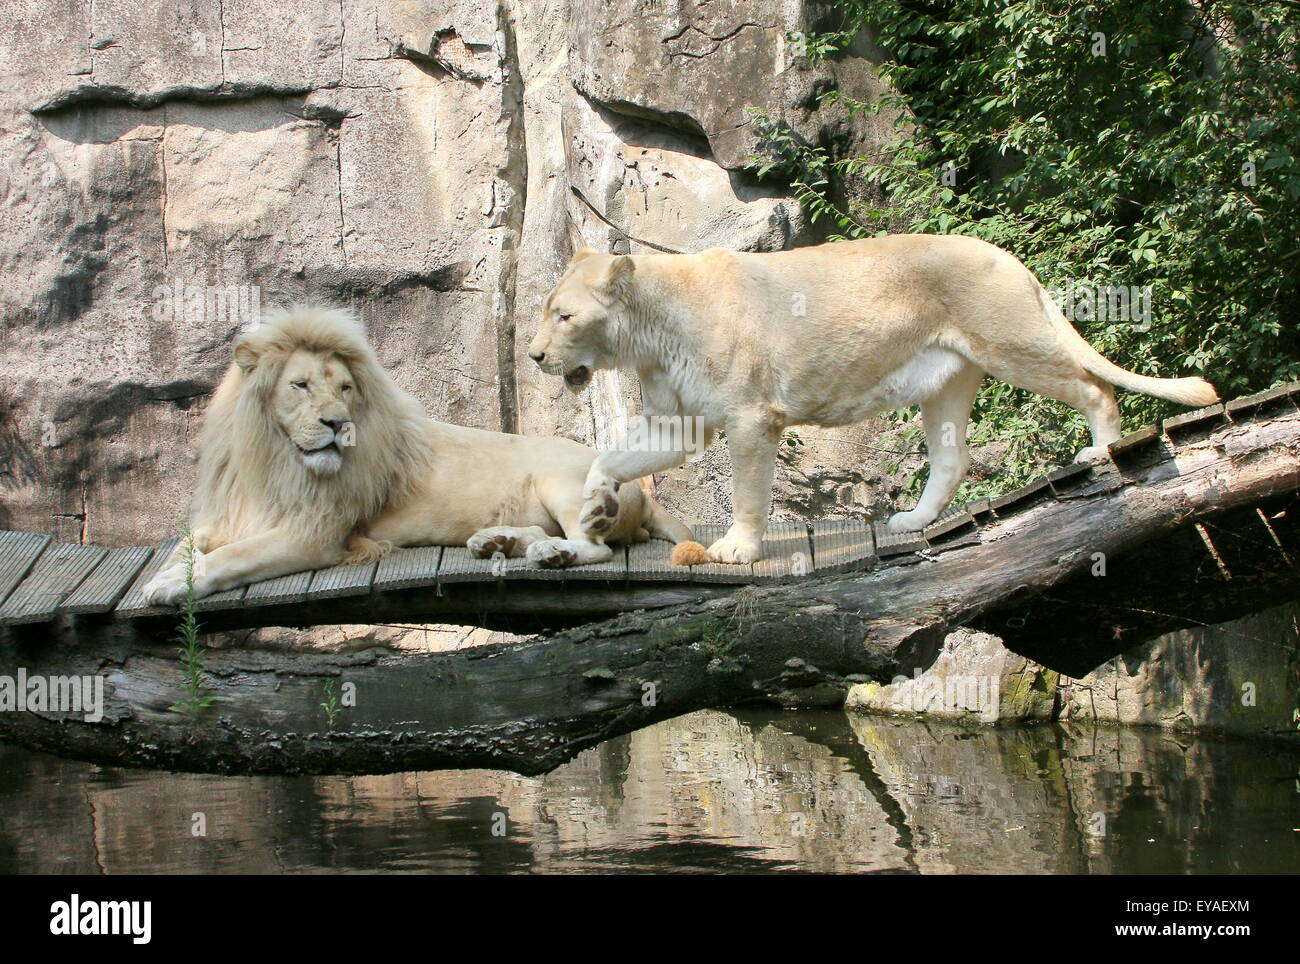 Mature male  white lion  and lioness (Panthera leo Krugeri) at Ouwehand Rhenen Zoo, The Netherlands Stock Photo